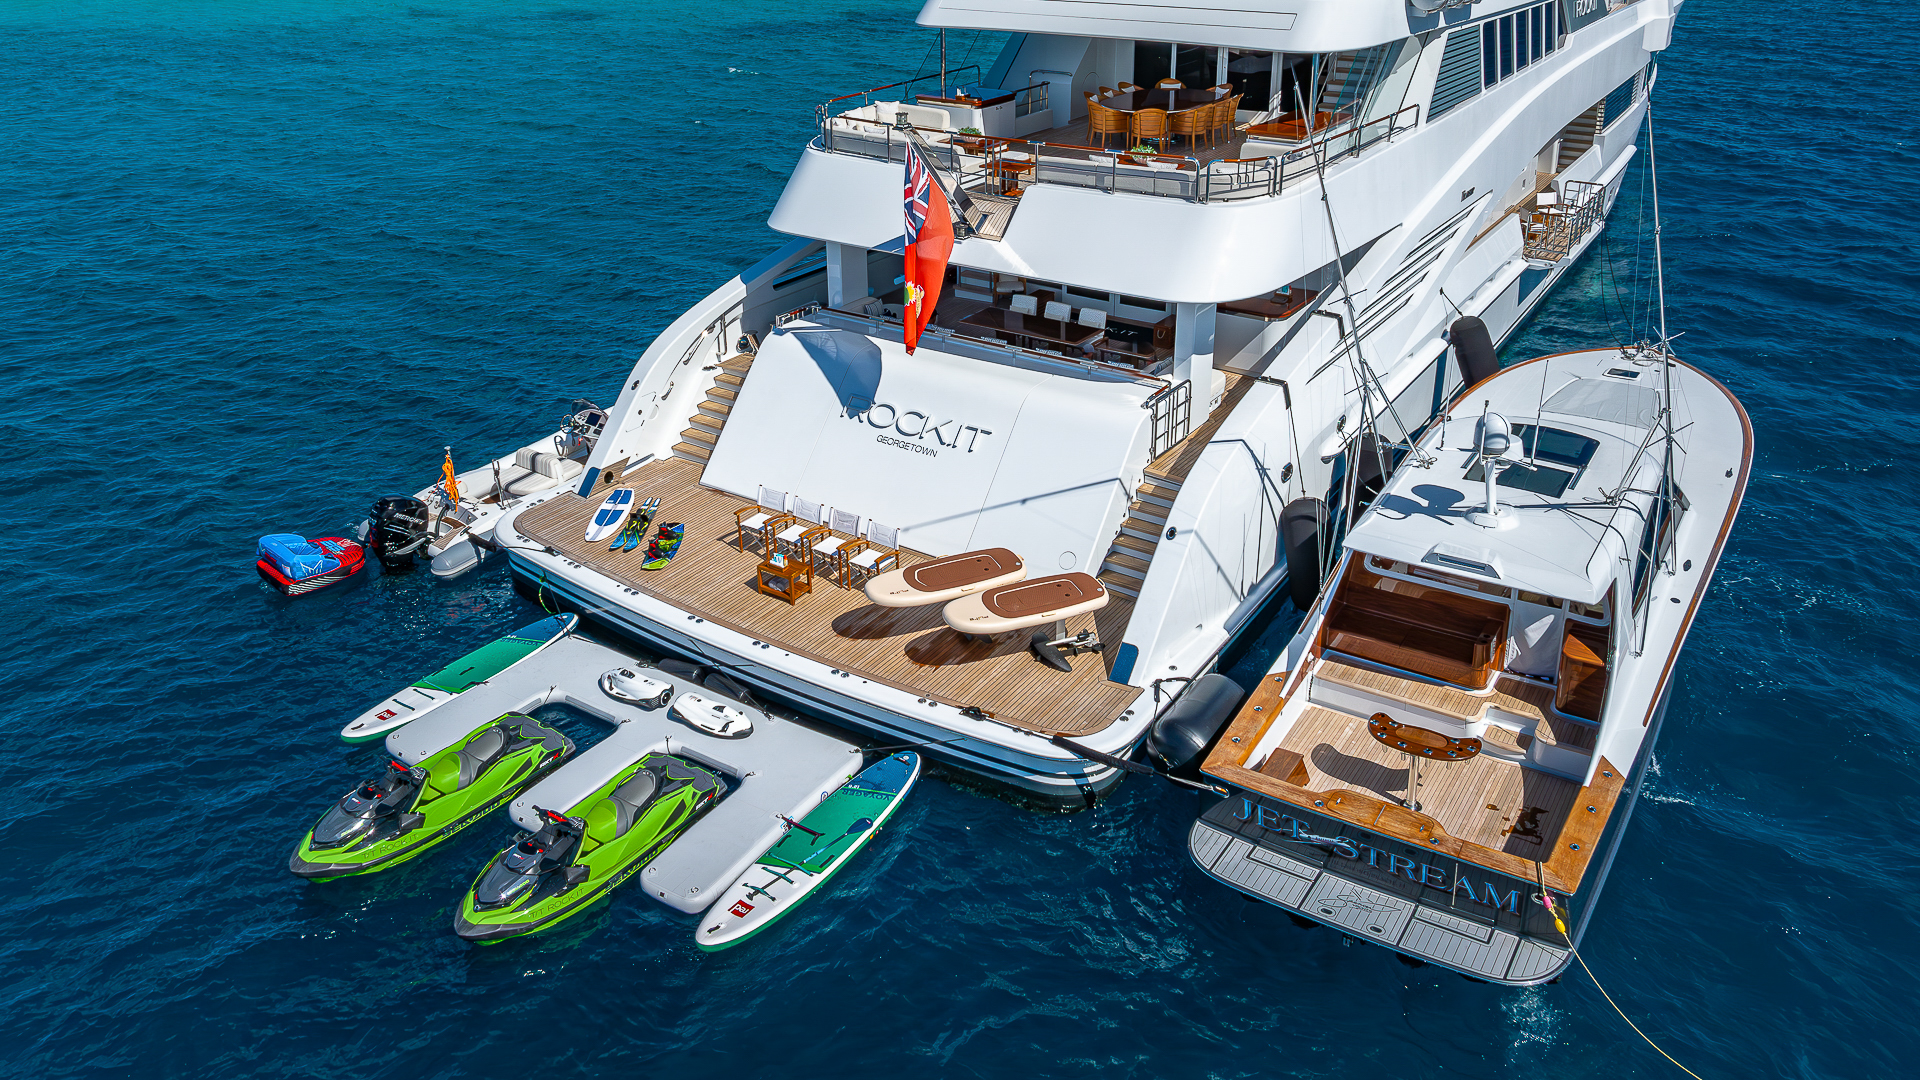 Rock It Luxury Yacht With Fishing Tender And Water Toys Credit Yachting Image